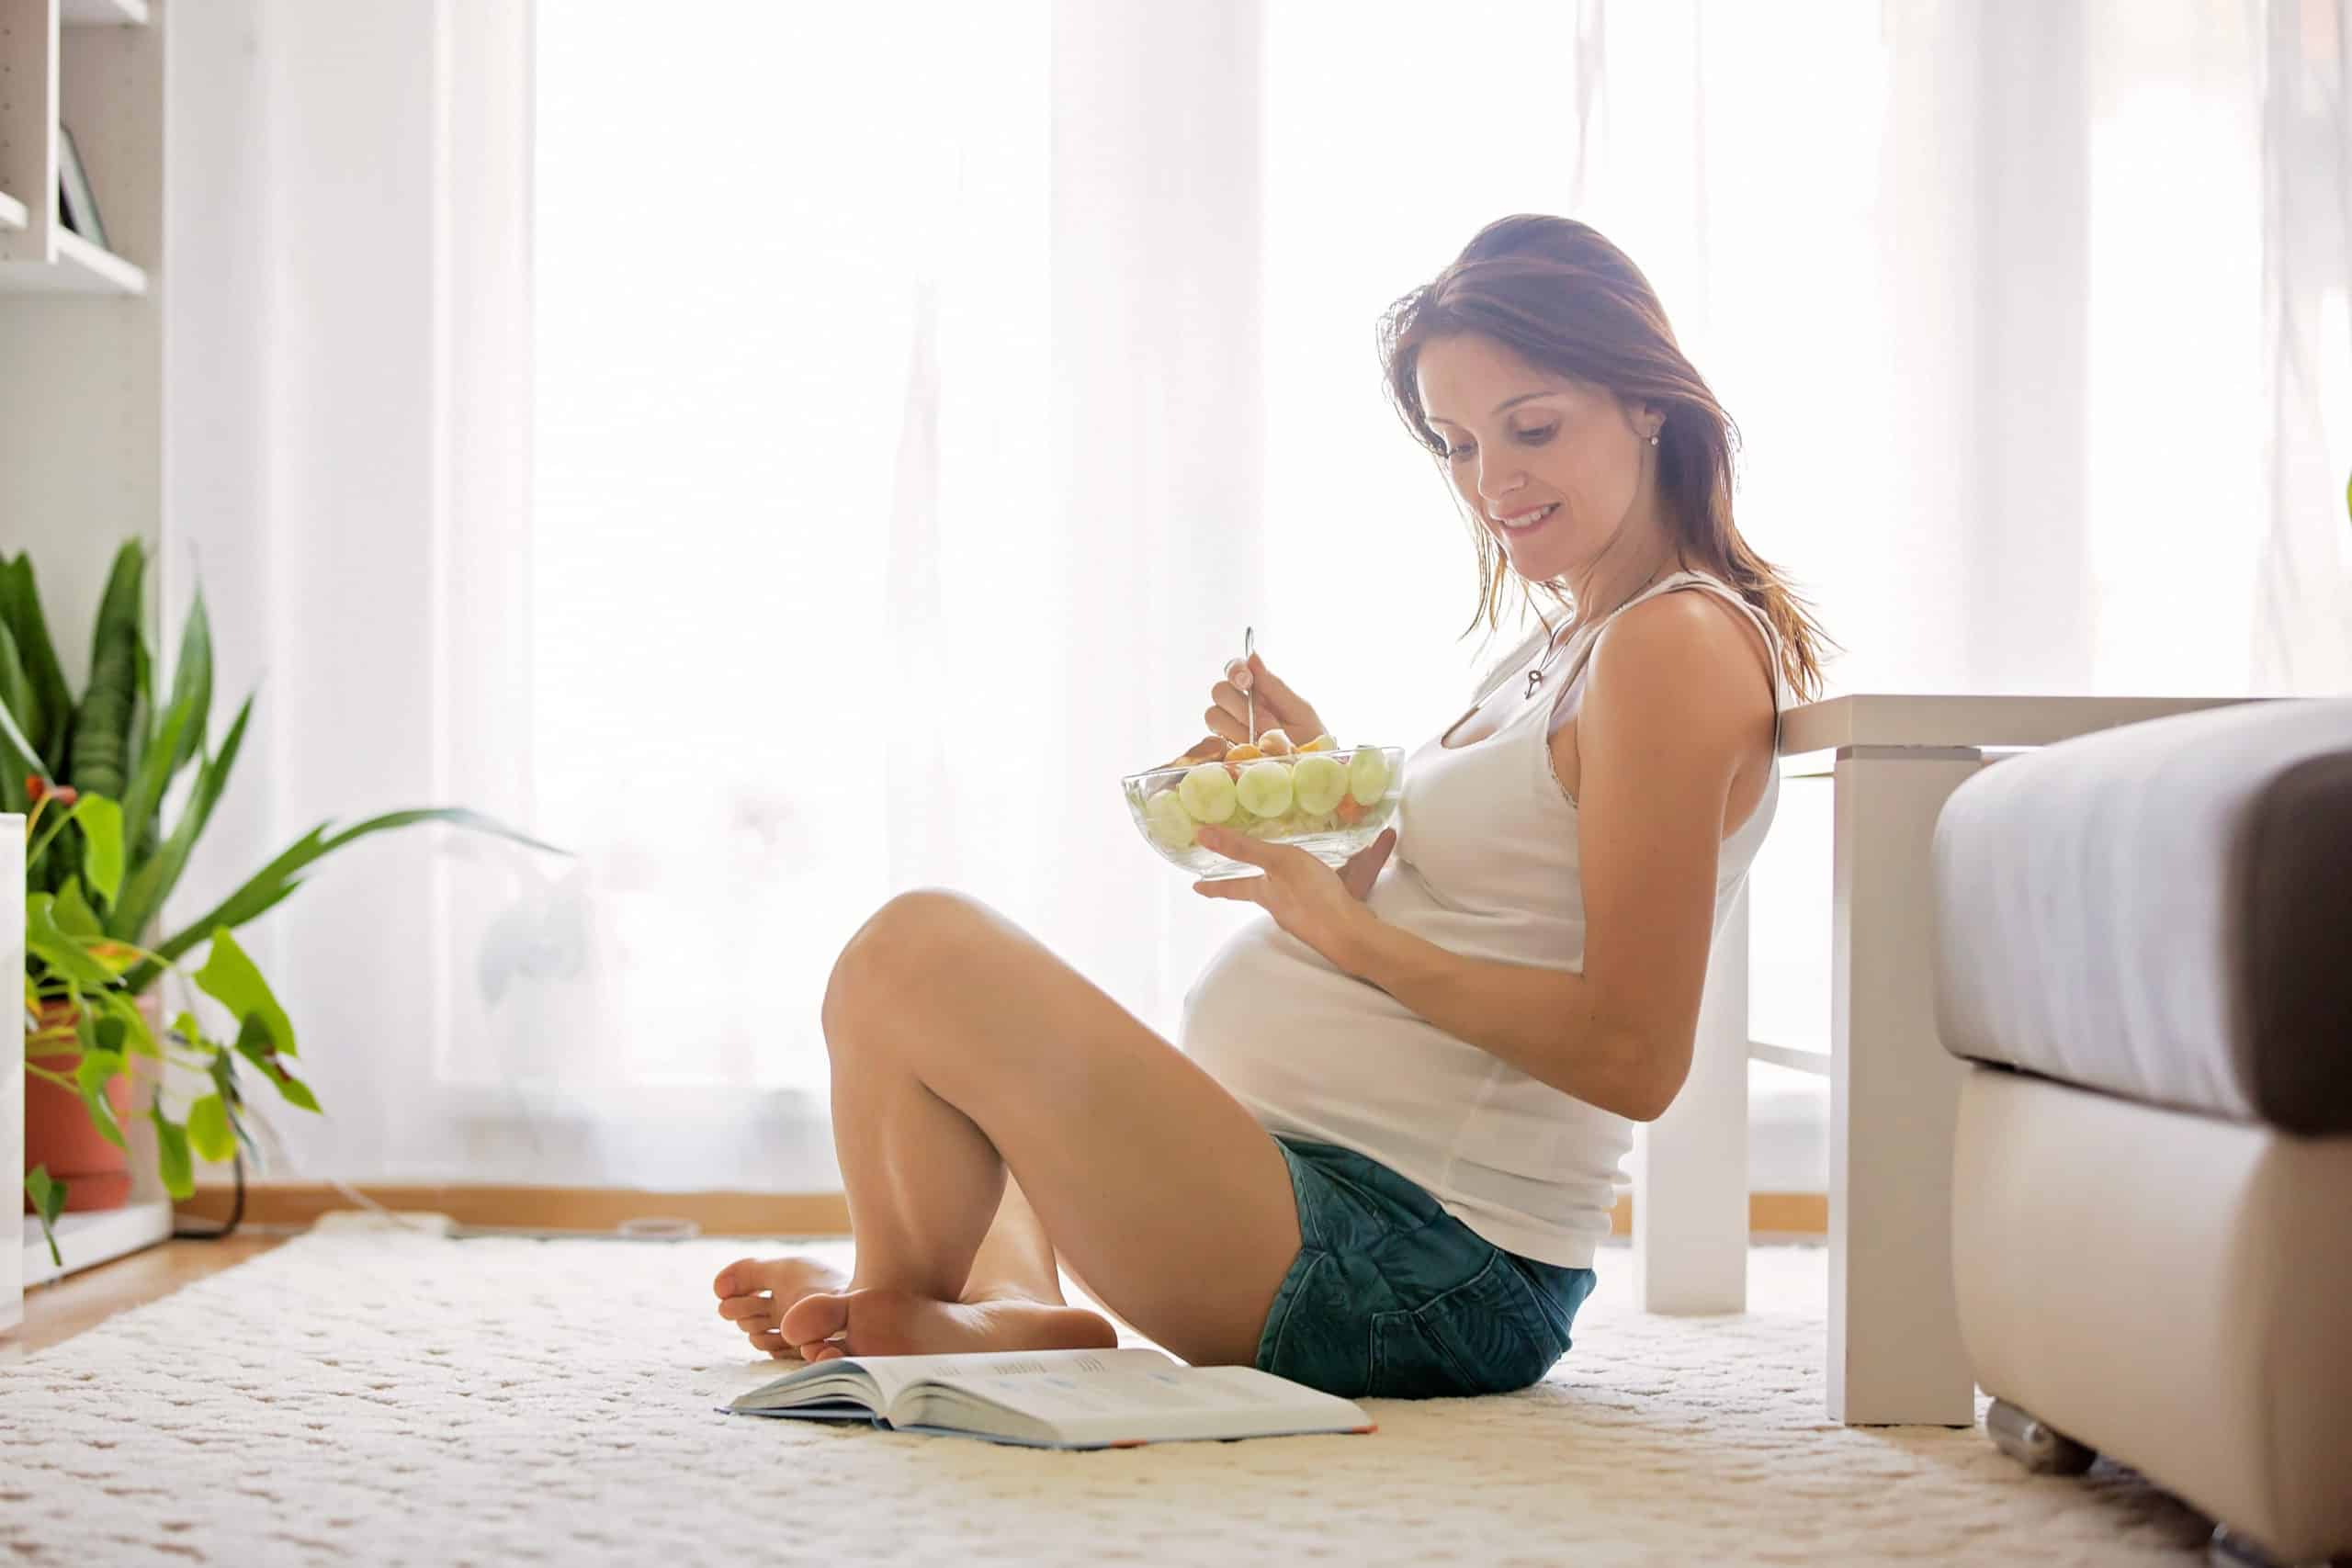 How important is nutrition during each trimester?